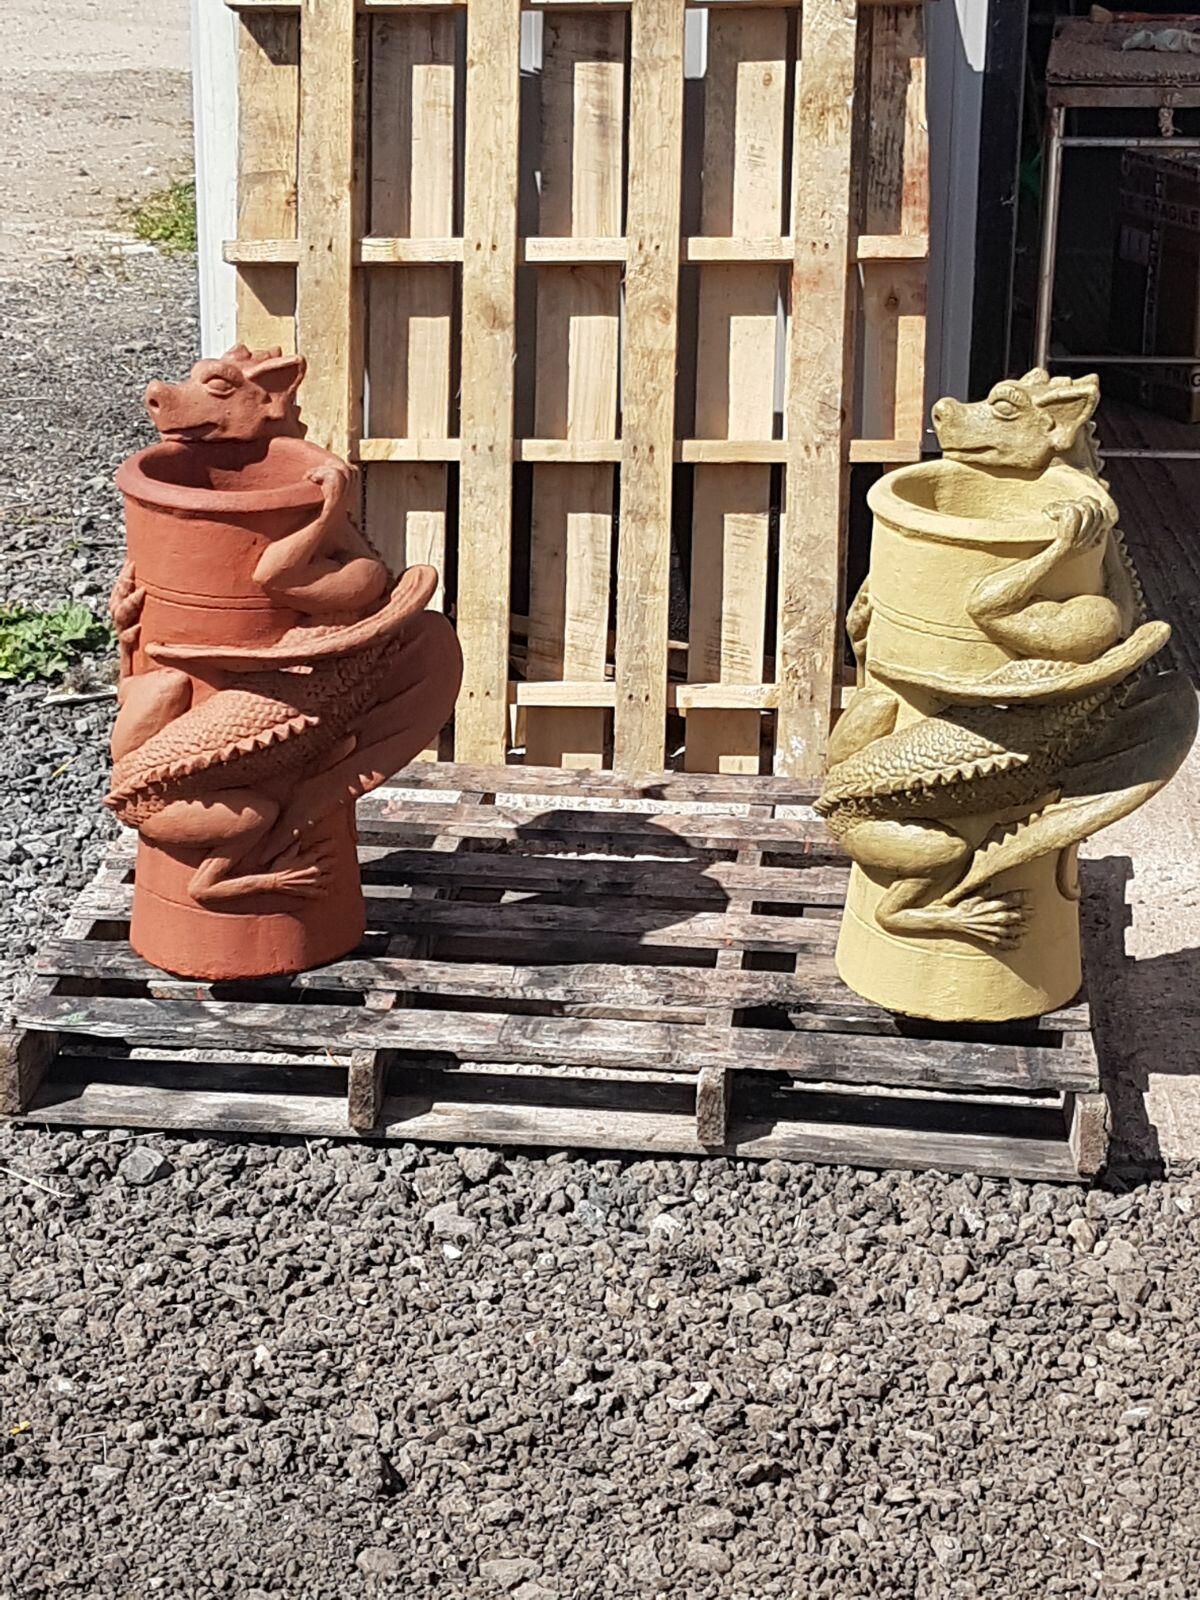 Dragon pots terracotta and bathstone on a wooden pallet